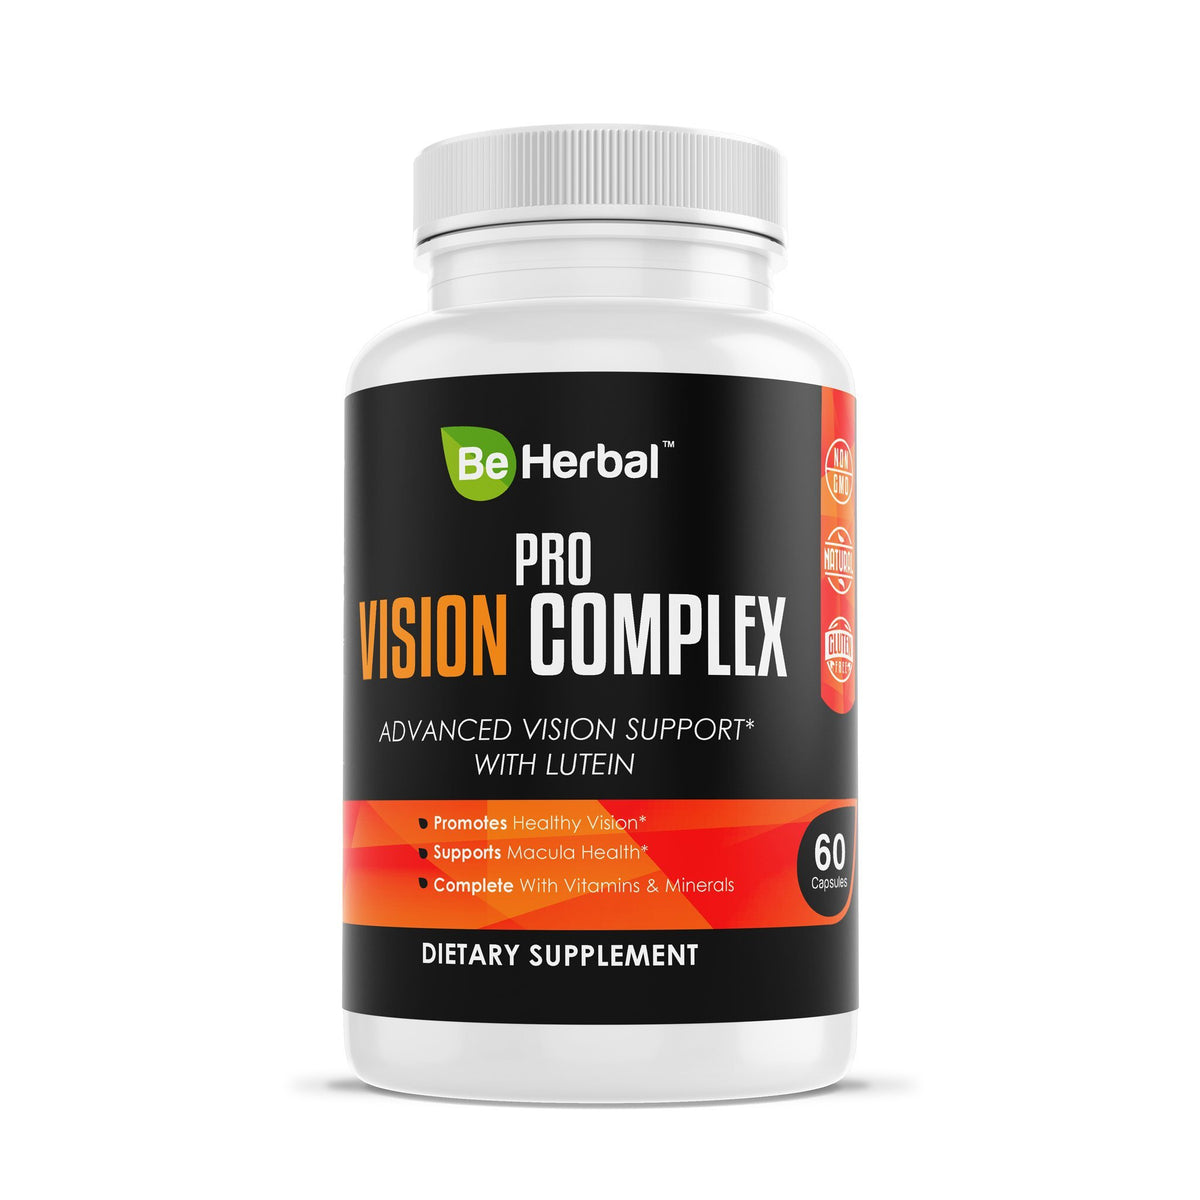 Pro Vision Complex - Advanced Vision Support with Lutein Herbal Supplements Be Herbal®